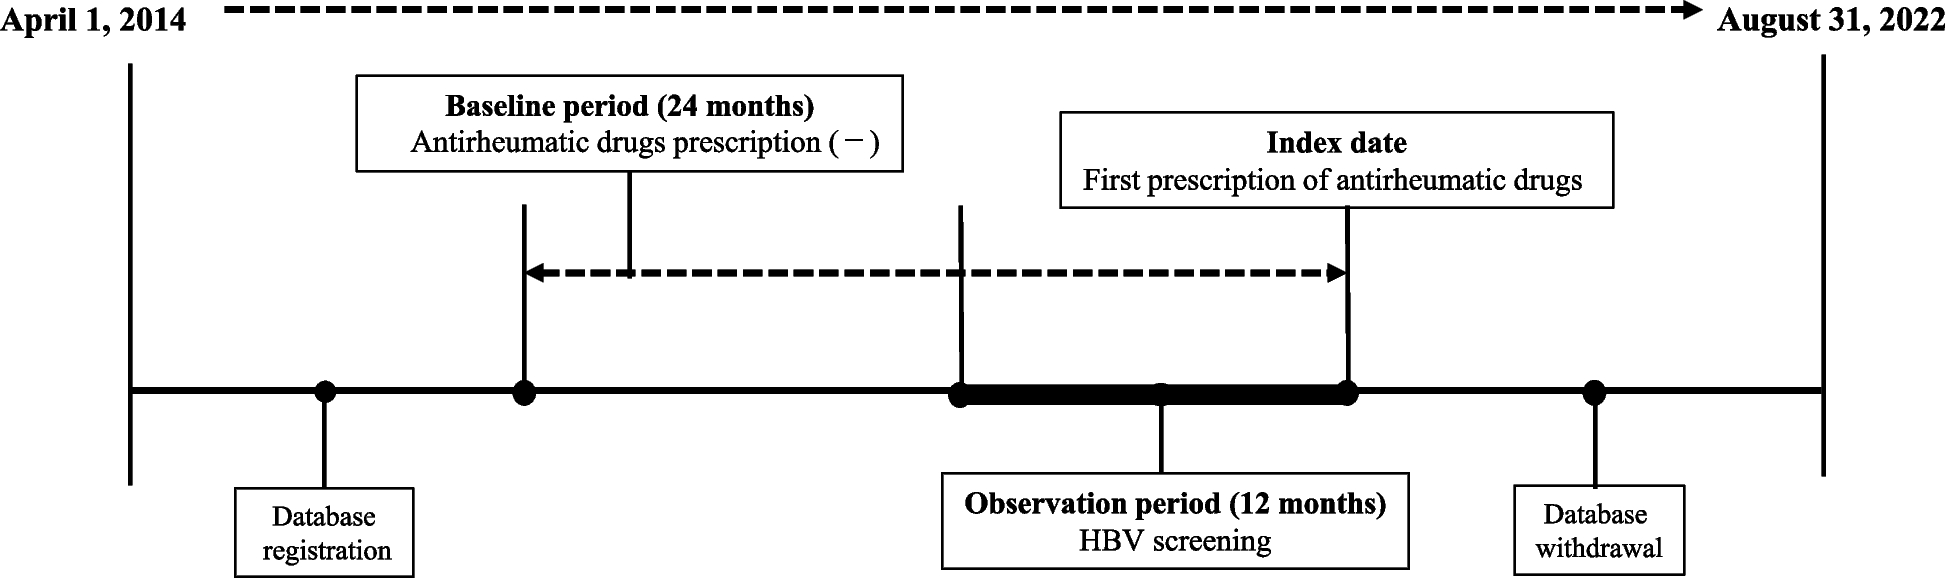 A cross-sectional survey of hepatitis B virus screening in patients who received immunosuppressive therapy for rheumatoid arthritis in Japan